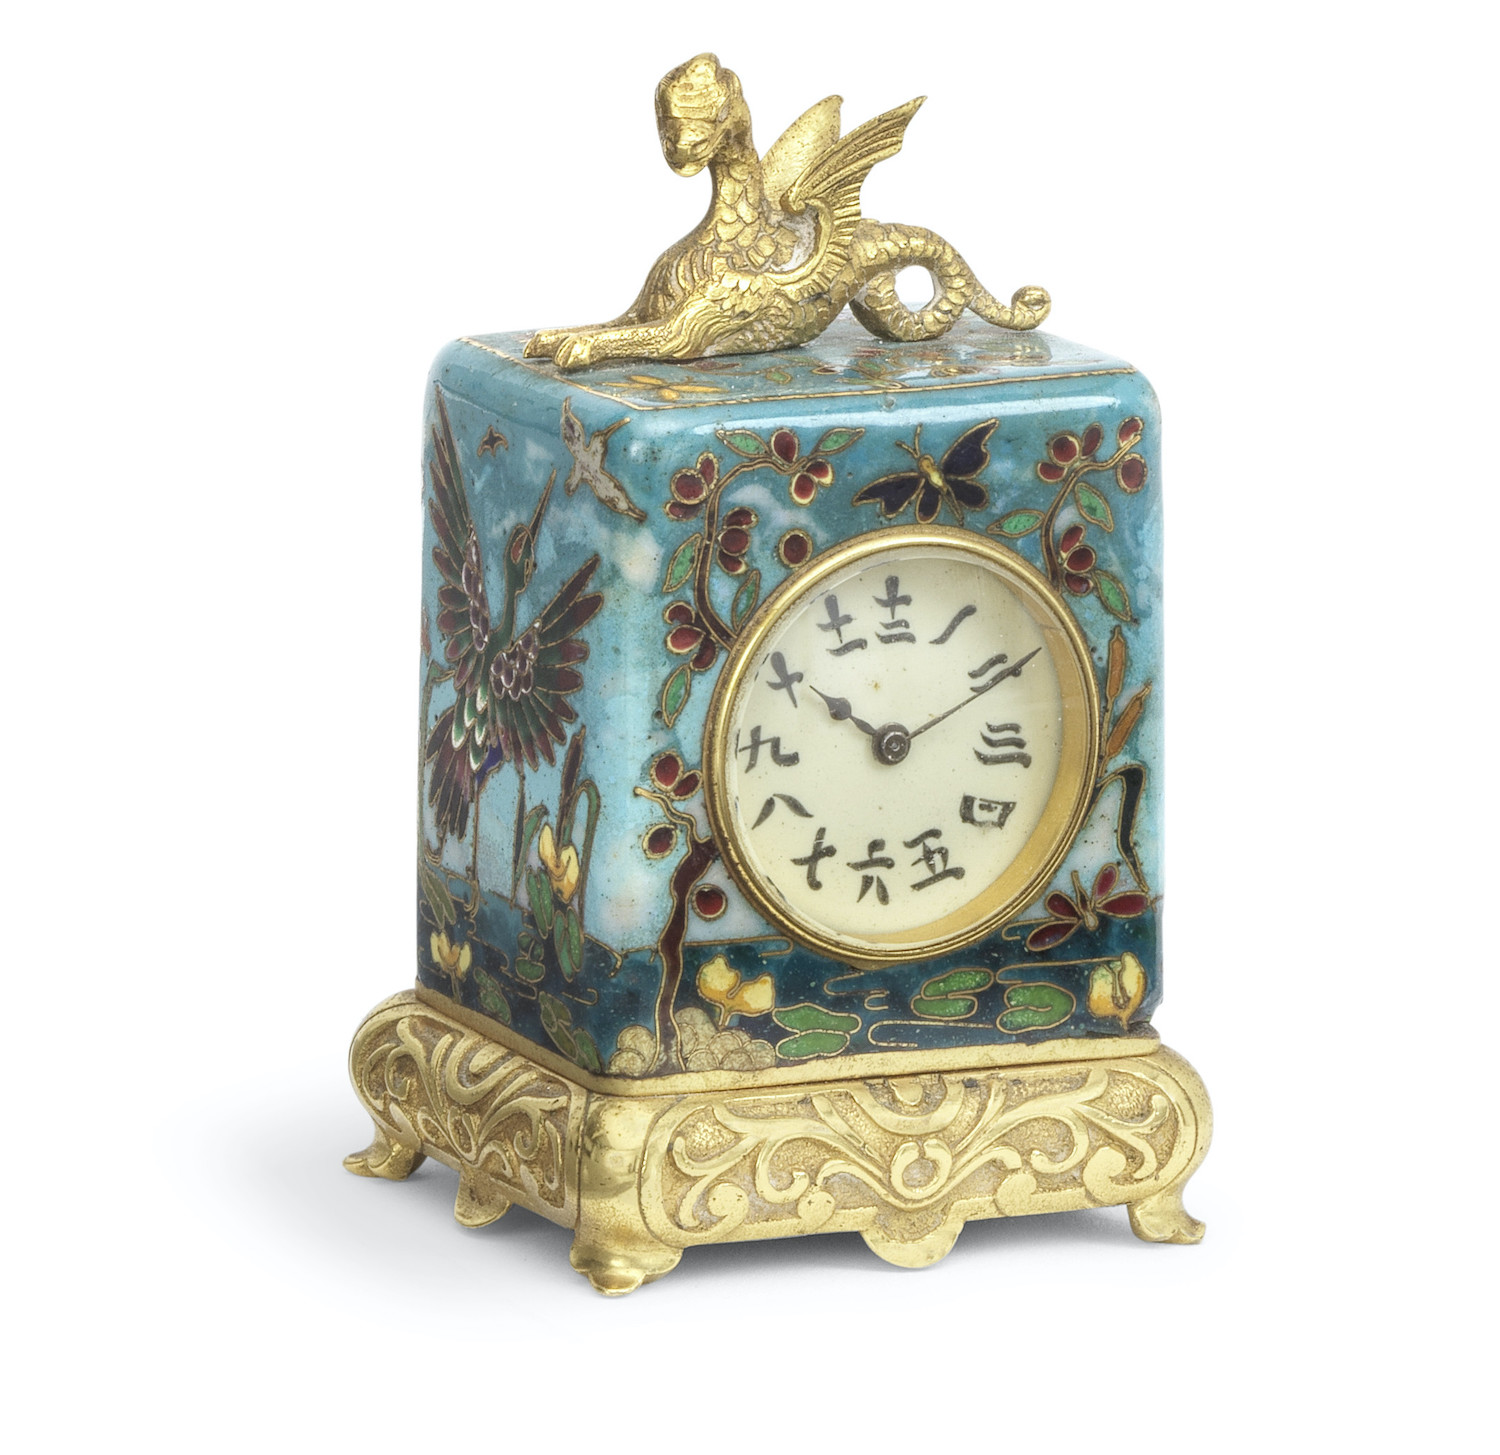 A rare late 19th century French miniature gilt metal, cloisonne enamel decorated carriage timepiece